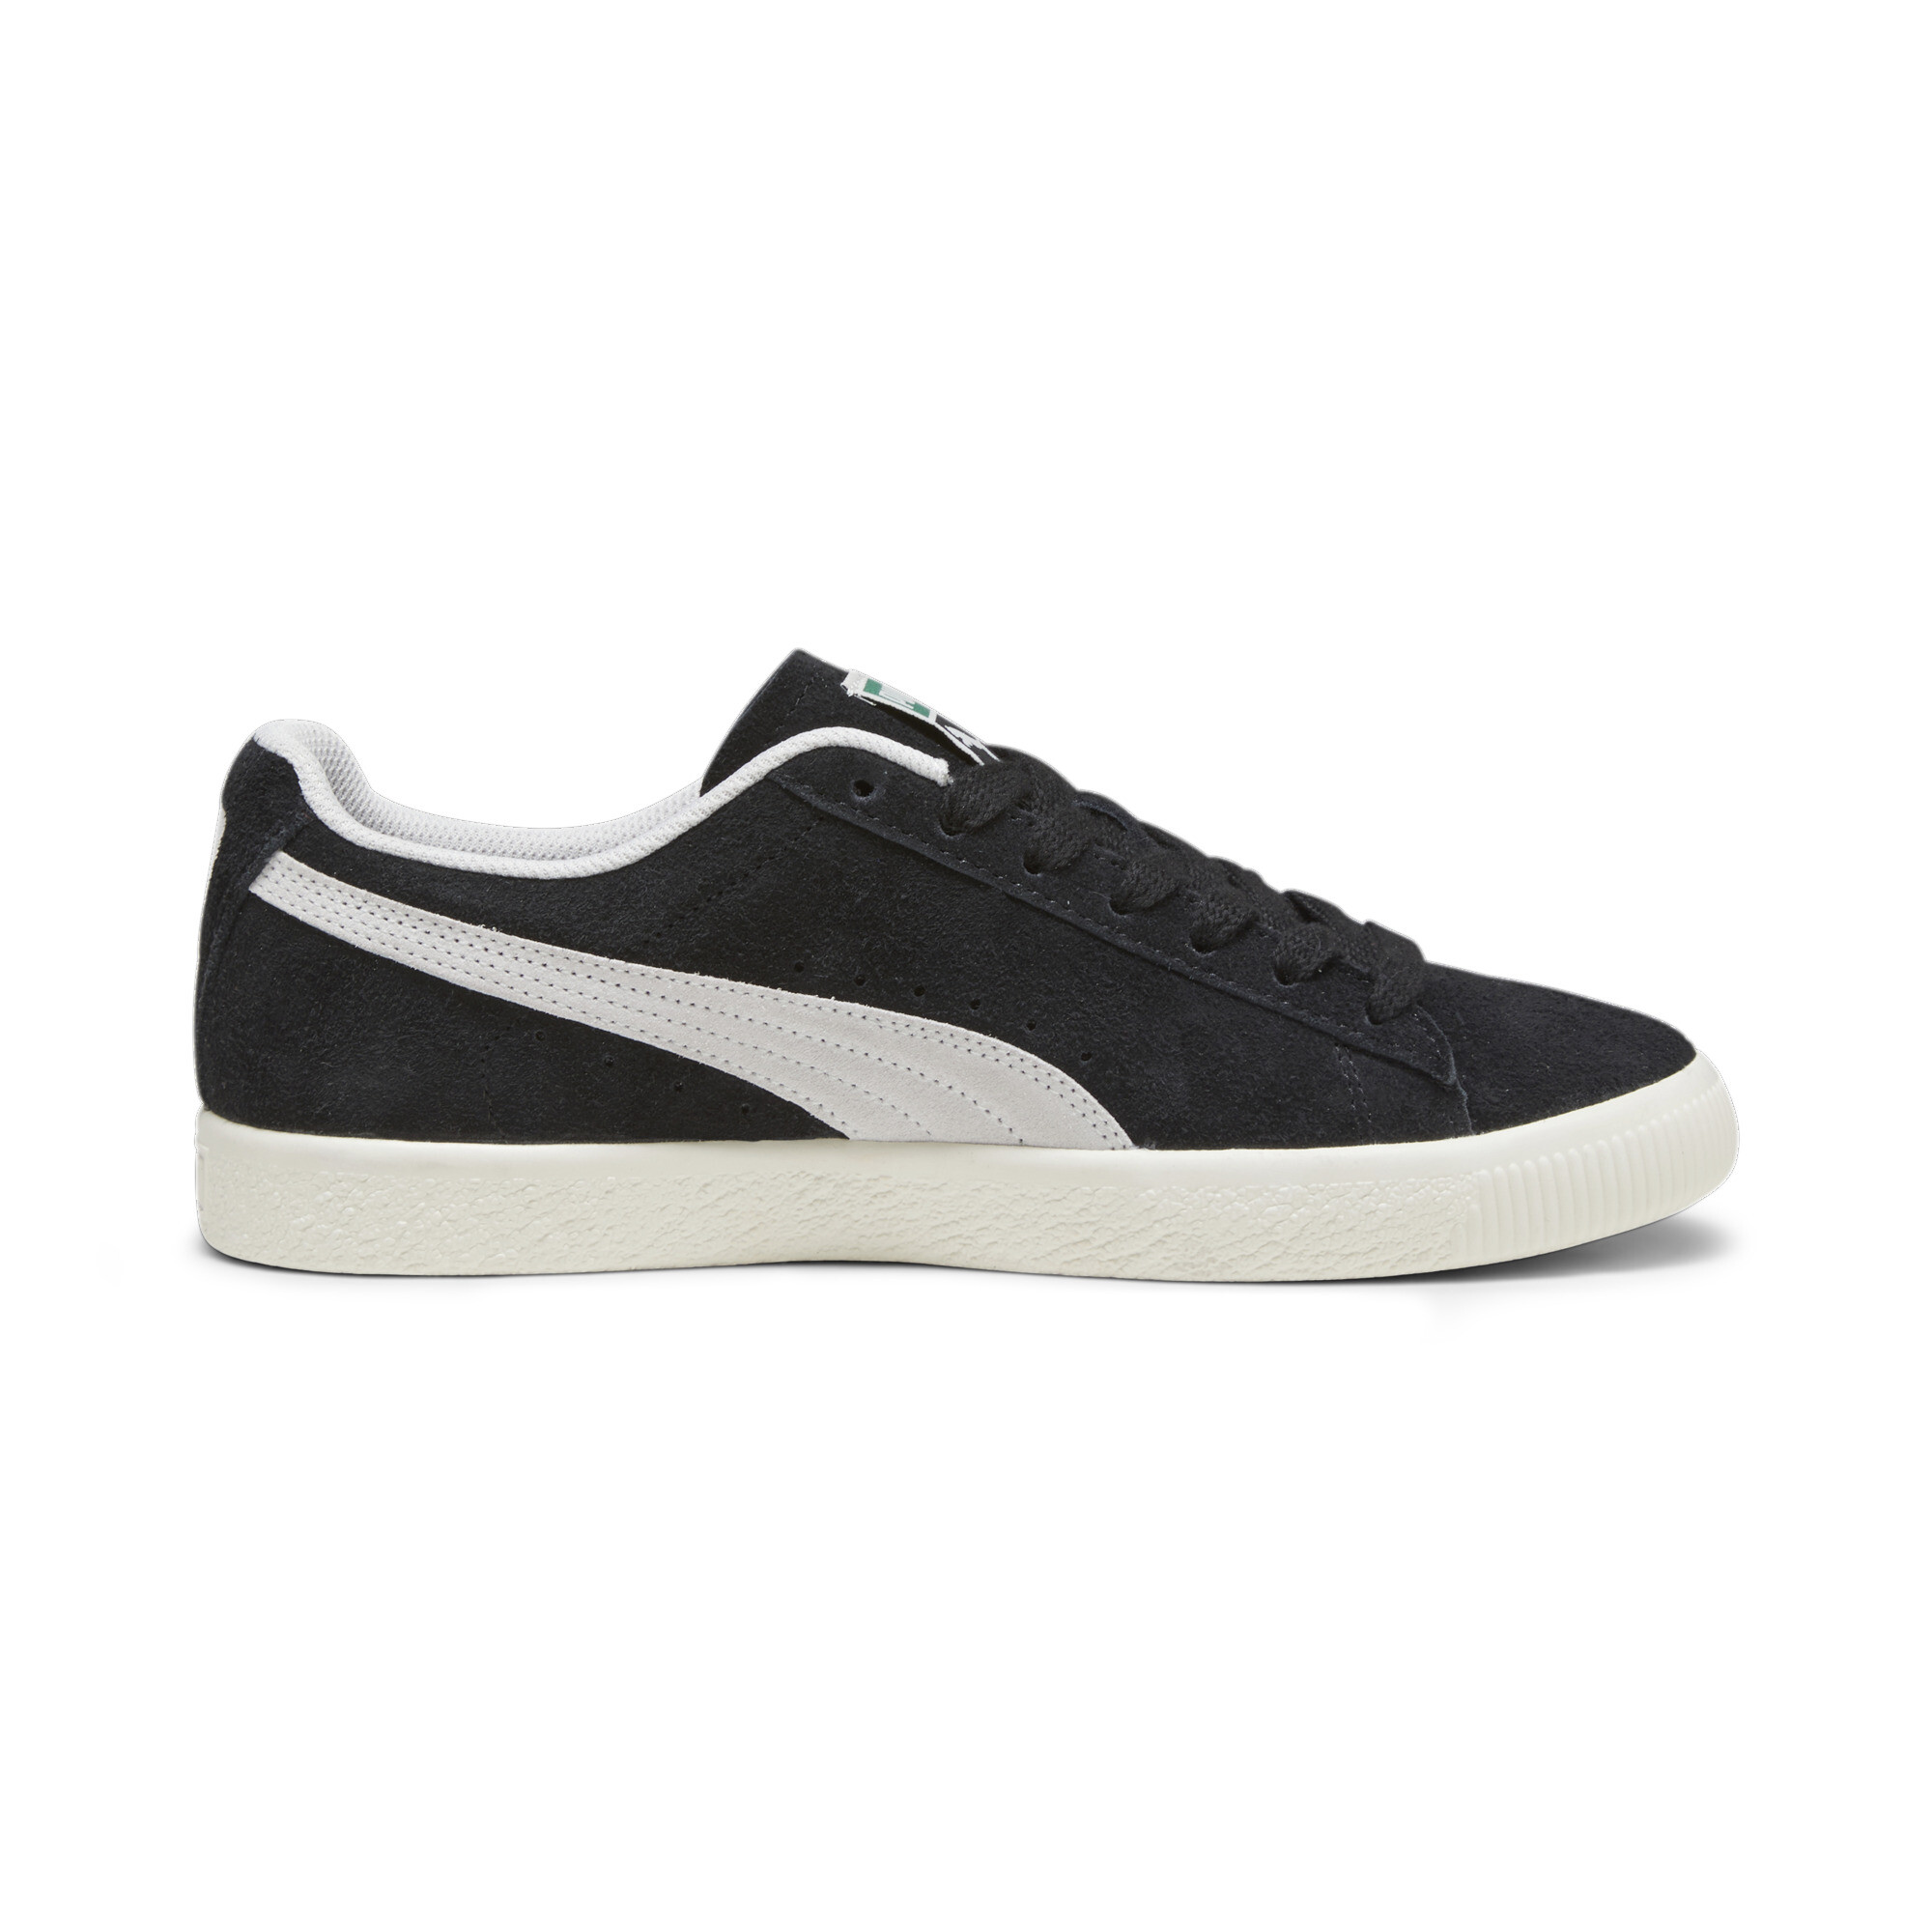 Men's PUMA Clyde Hairy Suede Sneakers In Black, Size EU 41